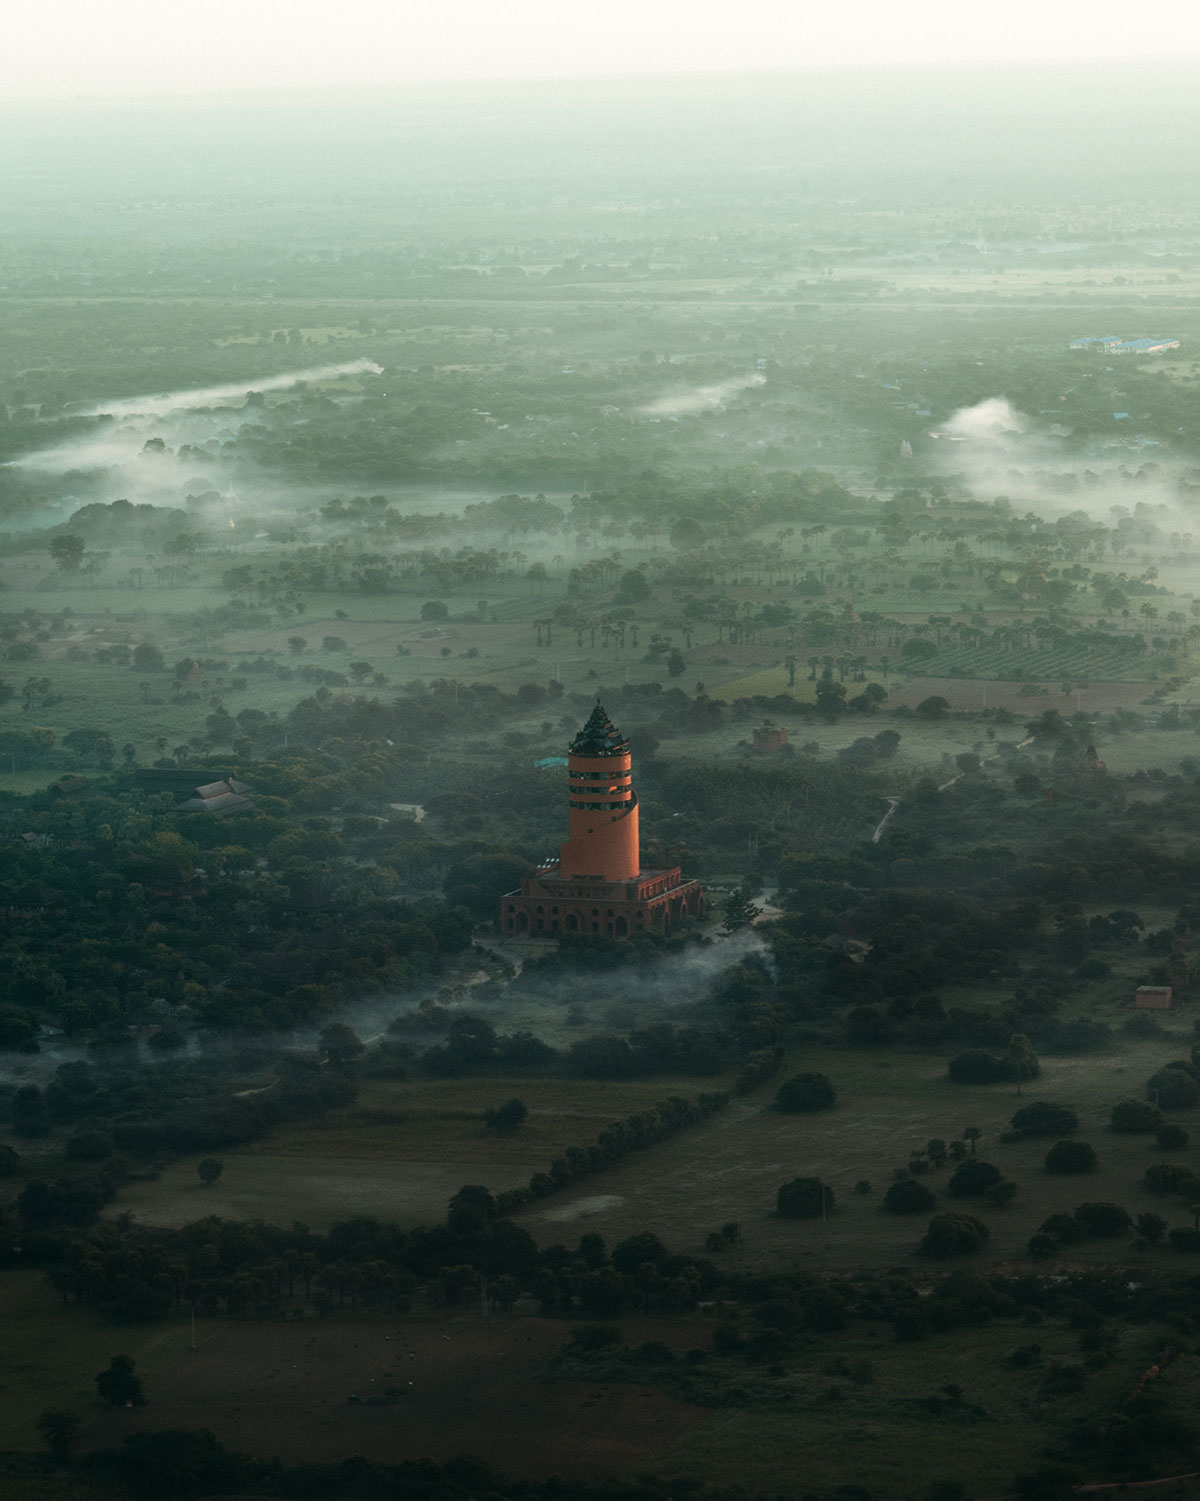 myanmar temples from above by dimitar karanikolov 10 The Amazing Temples of Myanmar from Above (10 Photos)